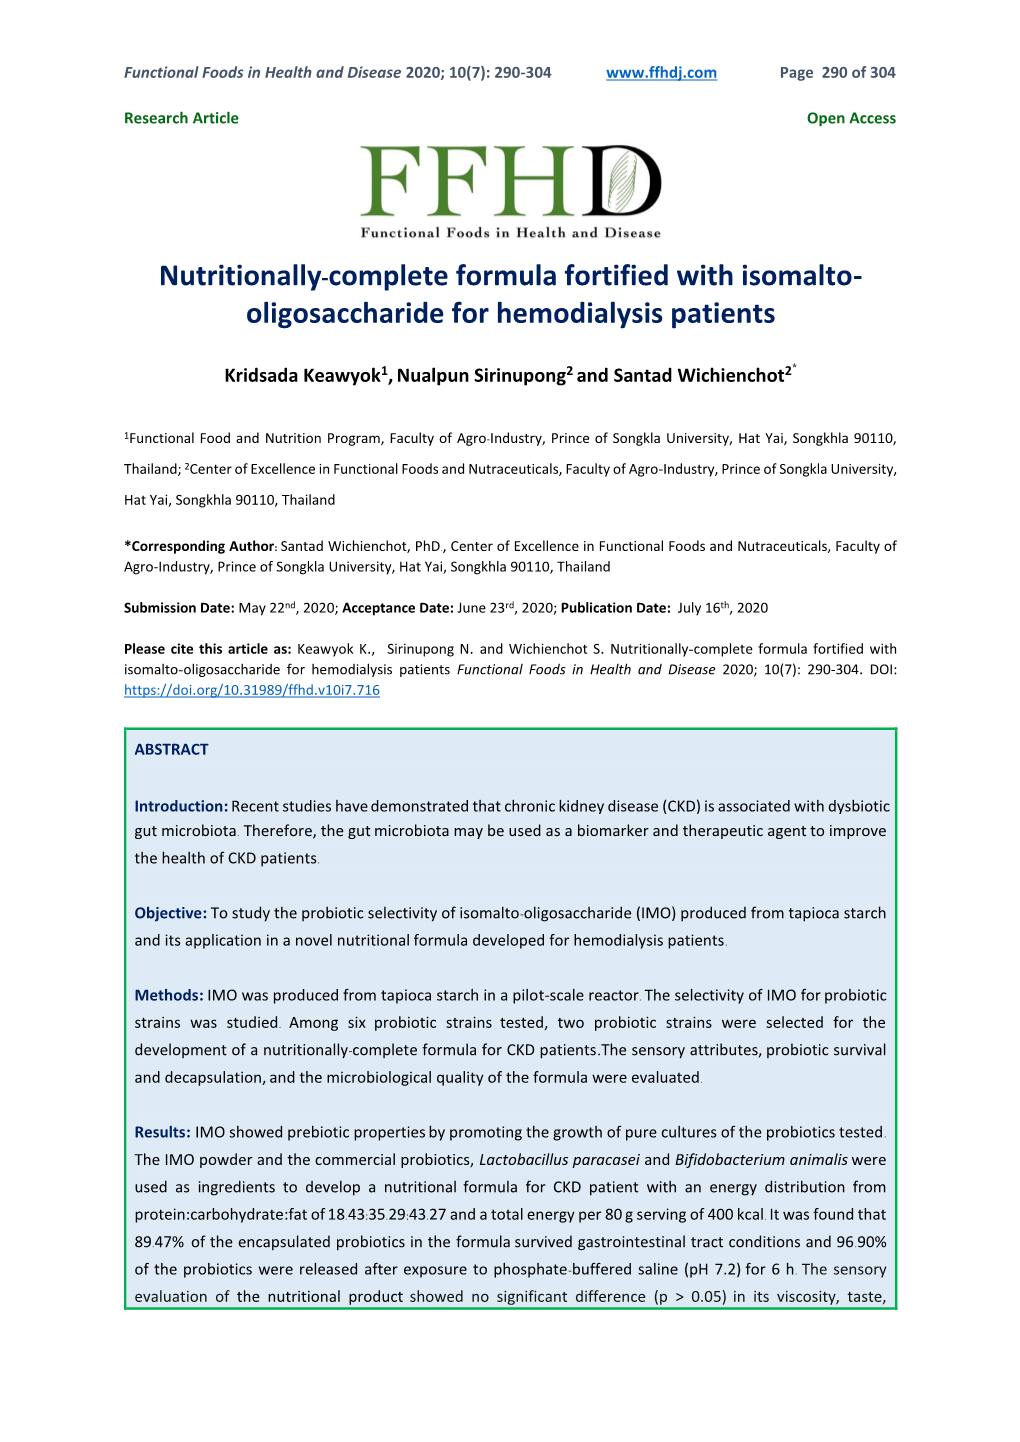 Nutritionally-Complete Formula Fortified with Isomalto- Oligosaccharide for Hemodialysis Patients